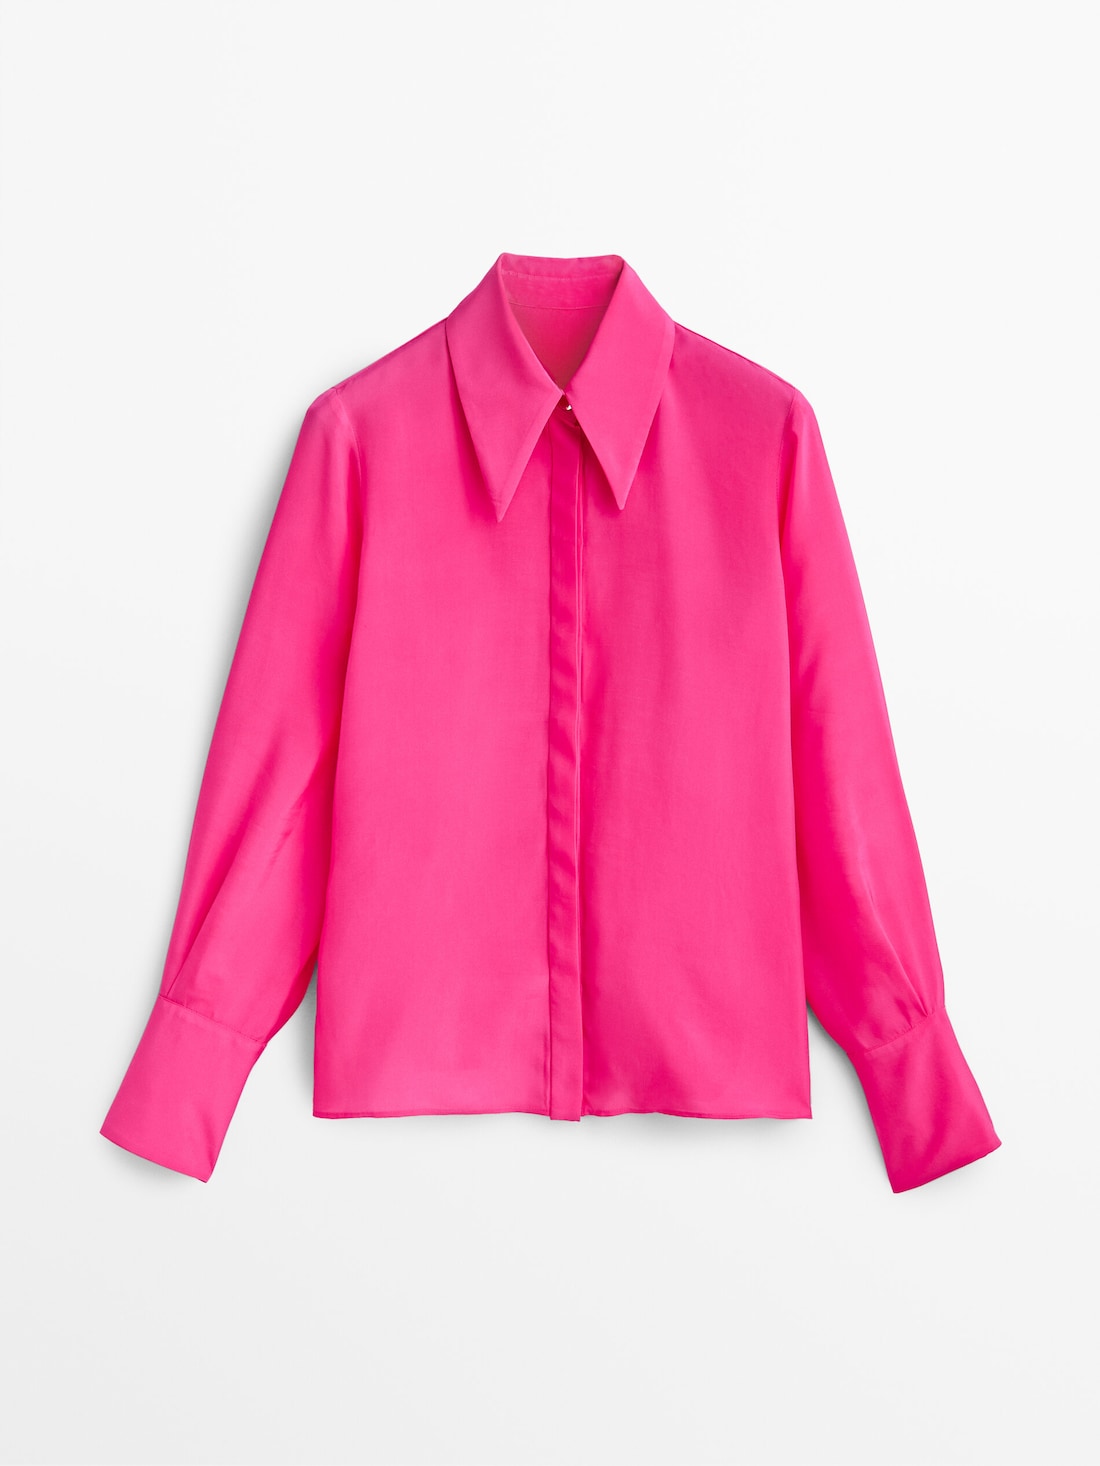 FUCHSIA SHIRT WITH GOLD-TONED BUTTONS